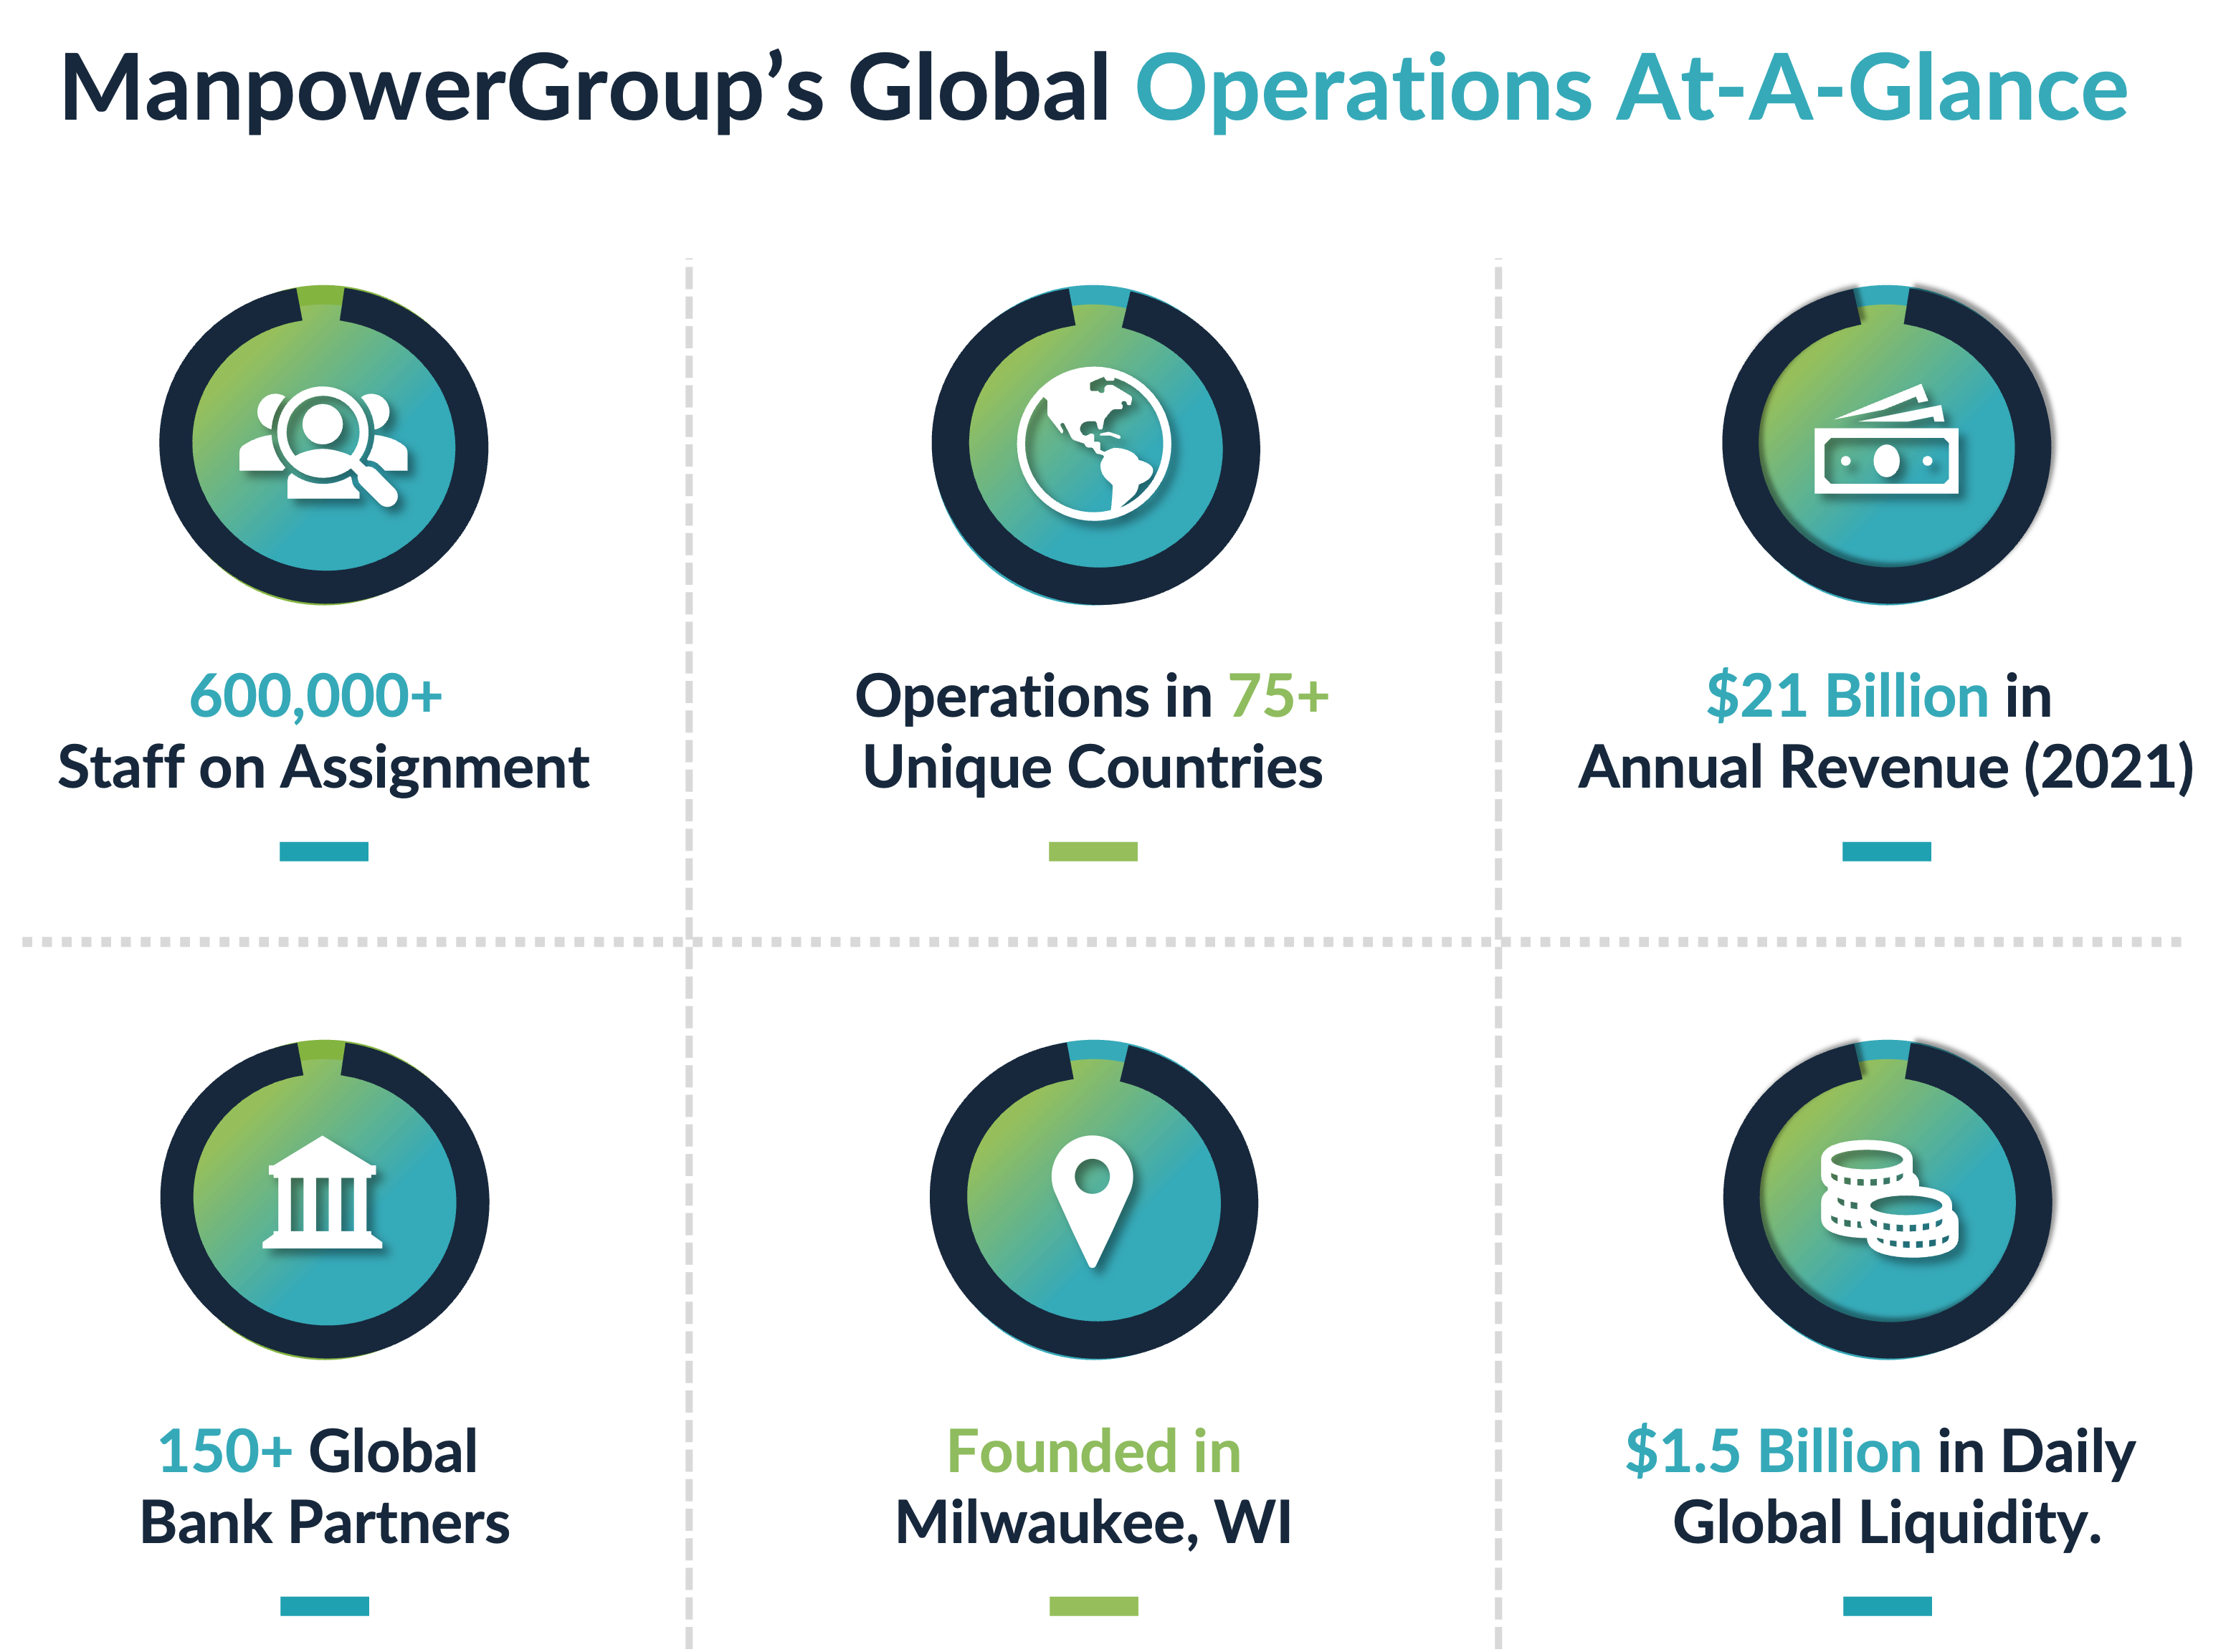 ManpowerGroup's Global Operations at a Glance